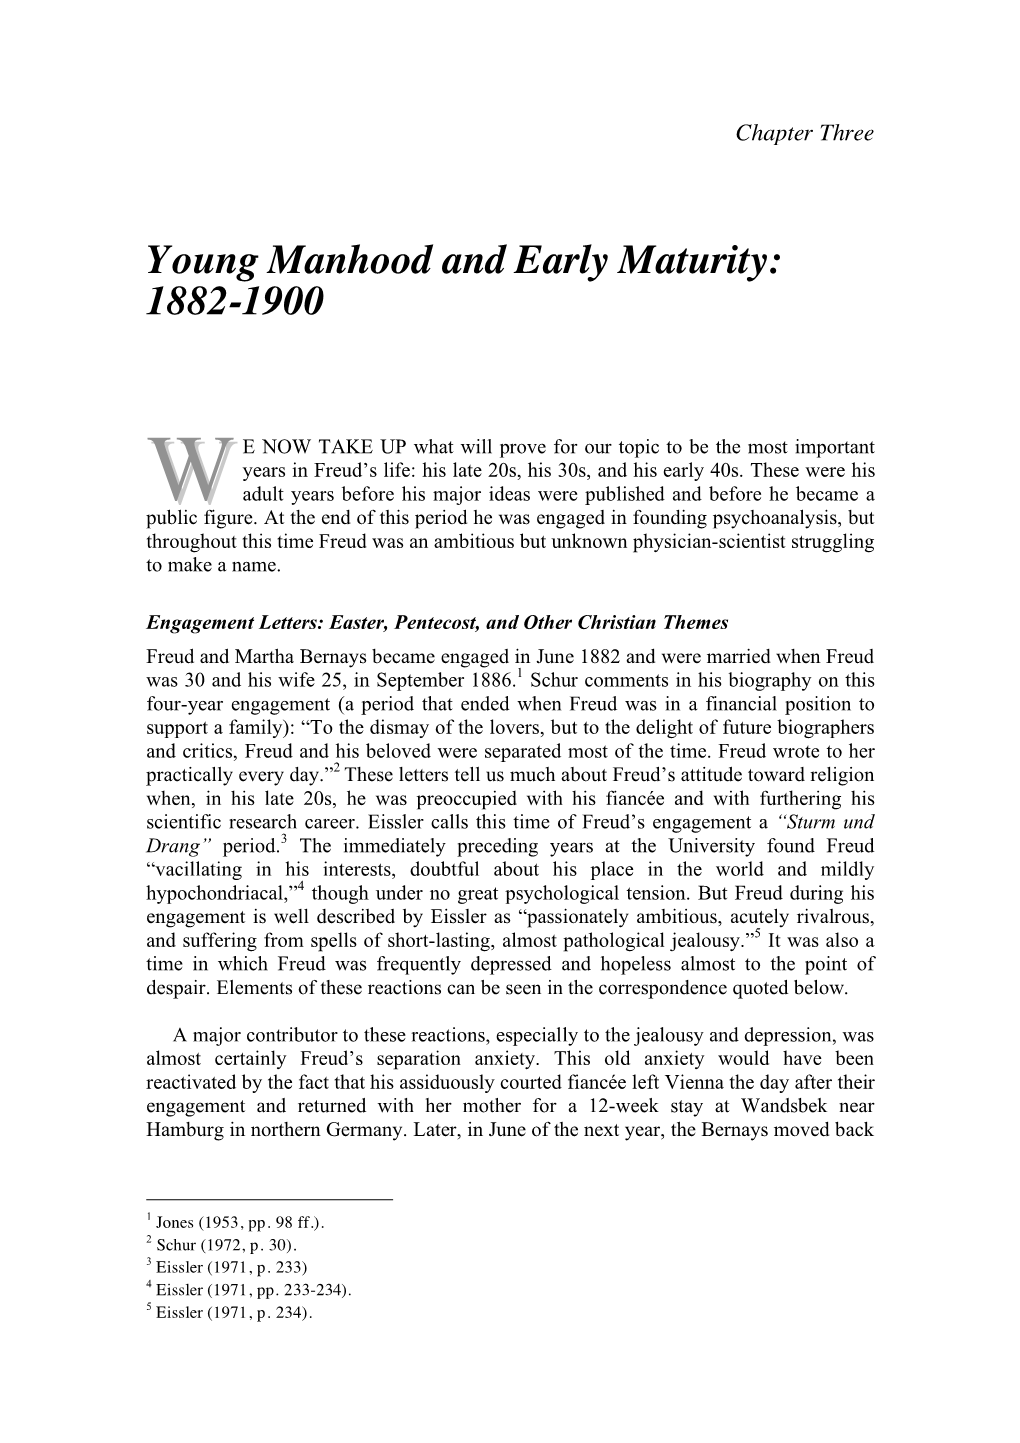 Young Manhood and Early Maturity: 1882-1900